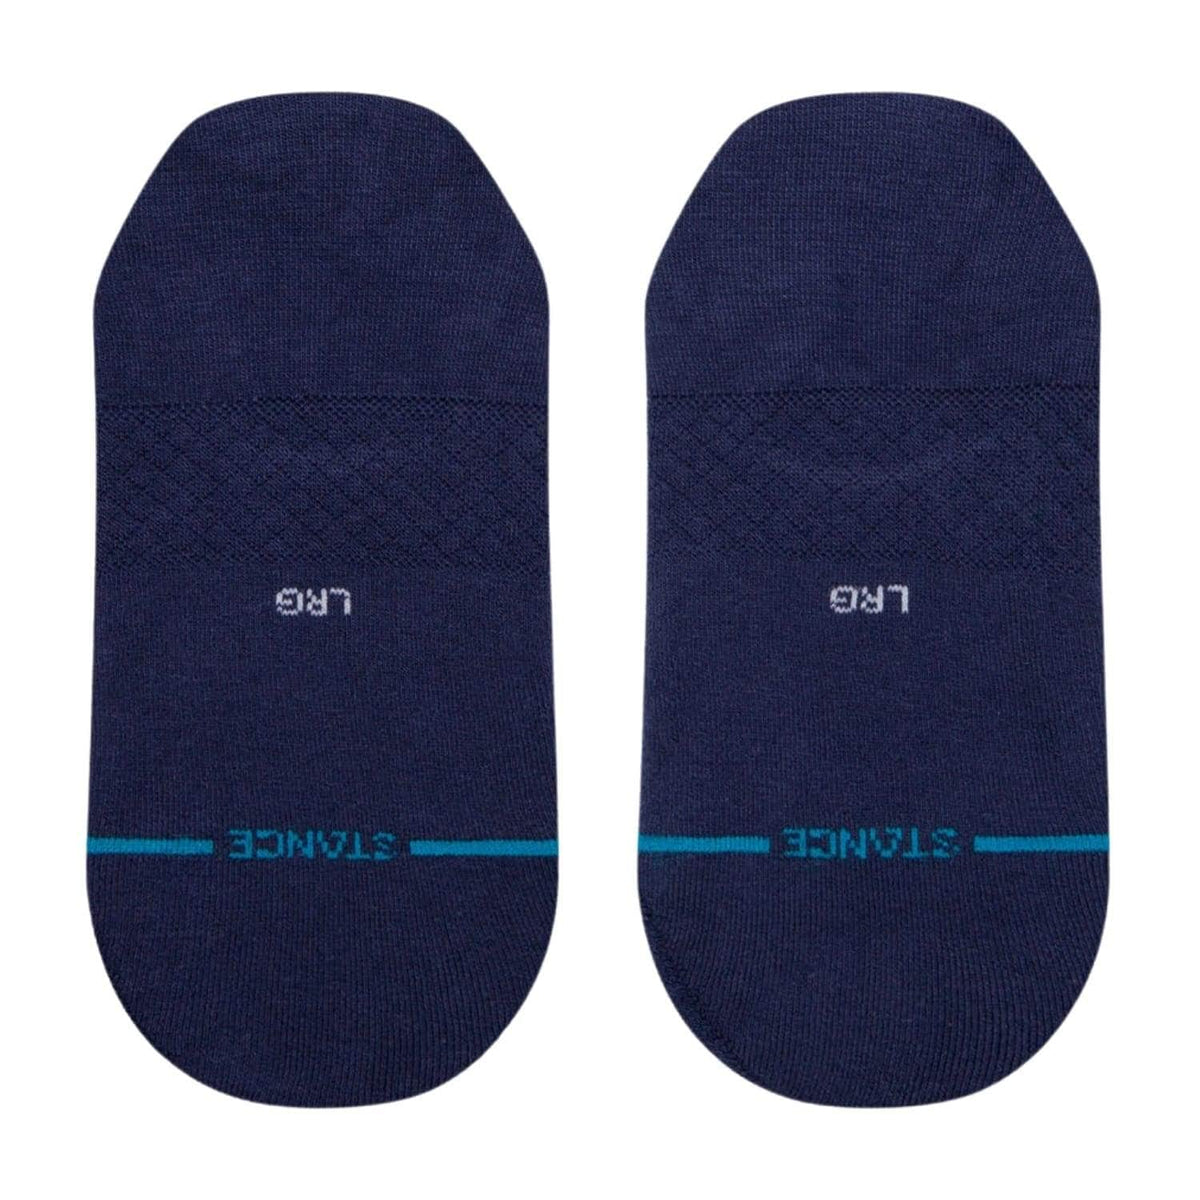 Stance Icon No Show Invisible Socks Dark Navy - Mens Invisible/No Show Socks by Stance